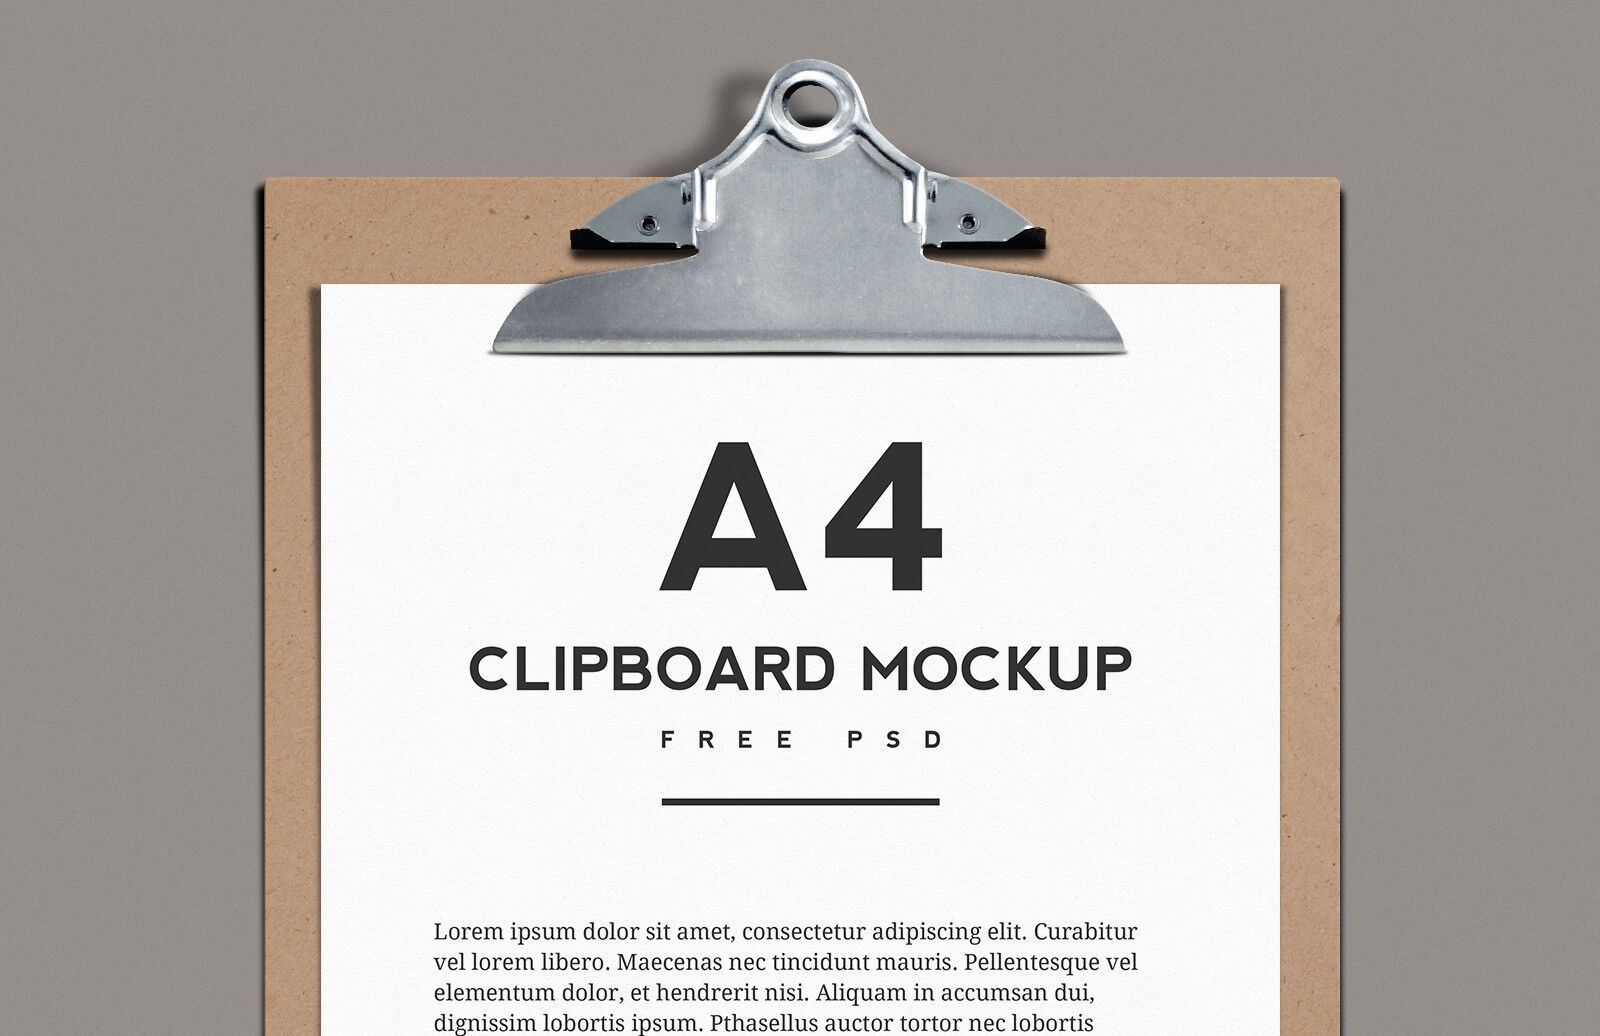 A4 Paper on a Clipboard Mockup FREE PSD